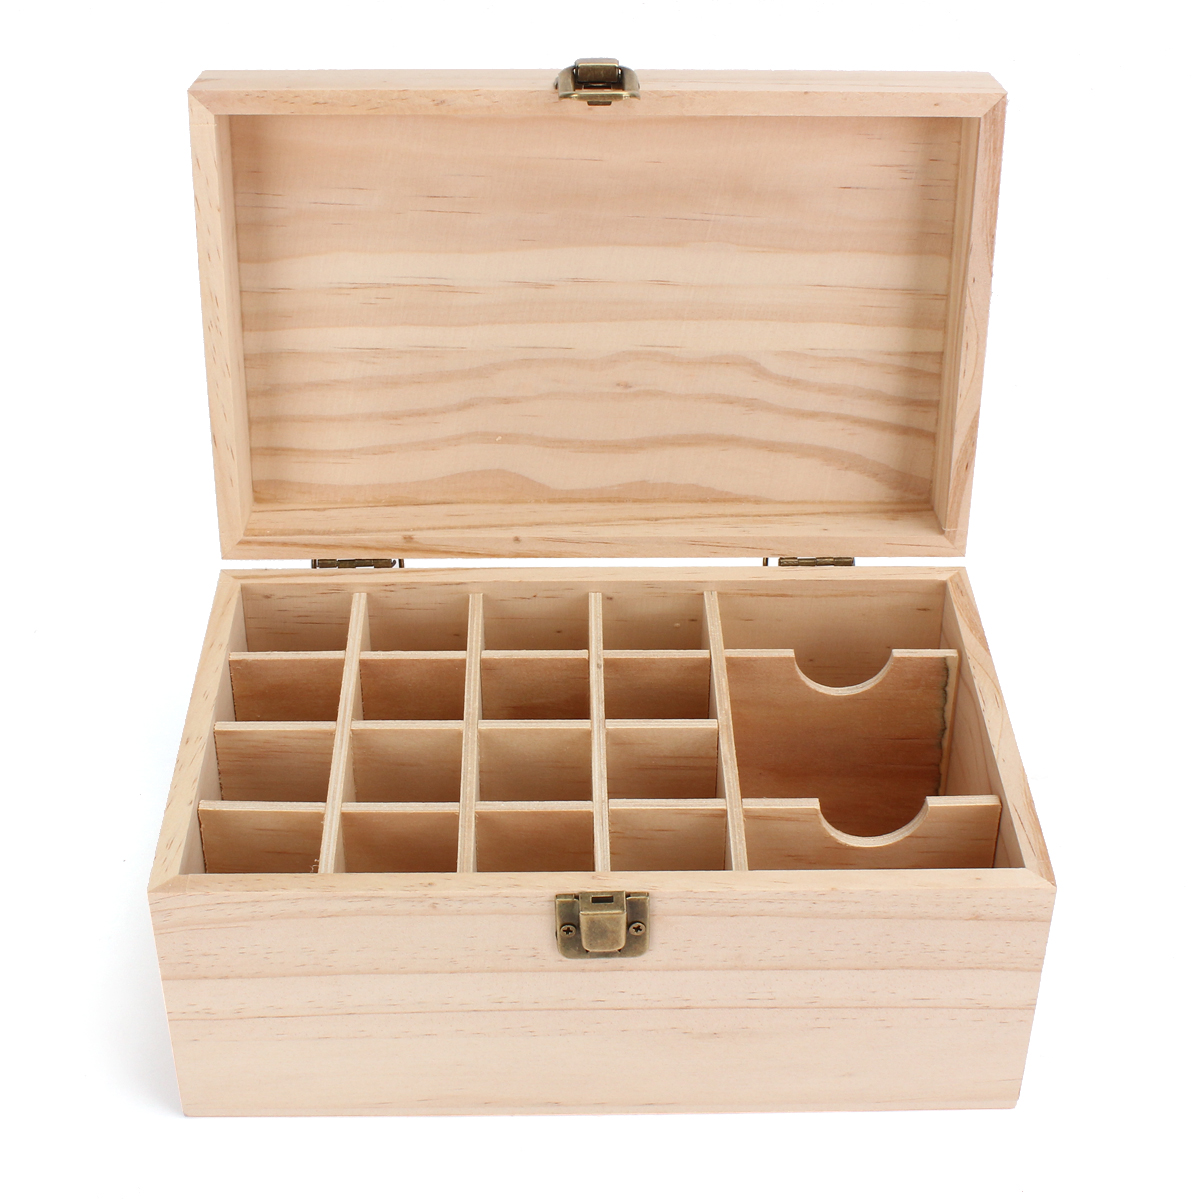 

19 Slots Essential Oil Storage Display Box Wooden Case Aromatherapy Container Organizer